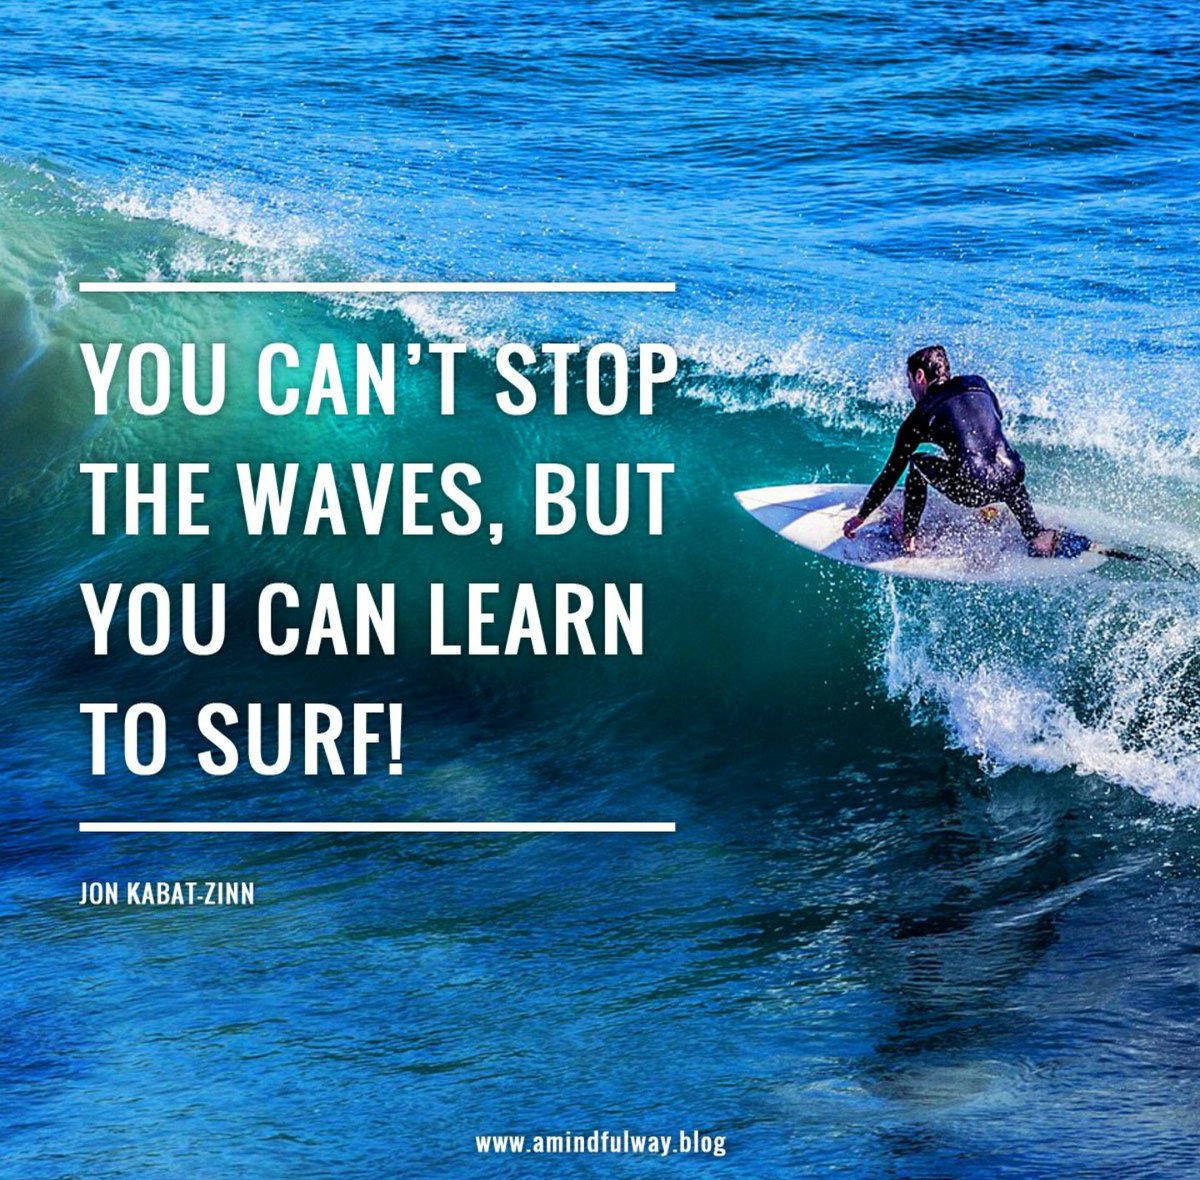 A Mindful Way You Can T Stop The Waves But You Can Learn To Surf Jonkabatzinn Quote Quoteoftheday Mindfulness Mindful Wellbeing Wellness Happiness Joytrain Jonkabatzinn Amindfulwayblog Inspirational Inspiration Joy